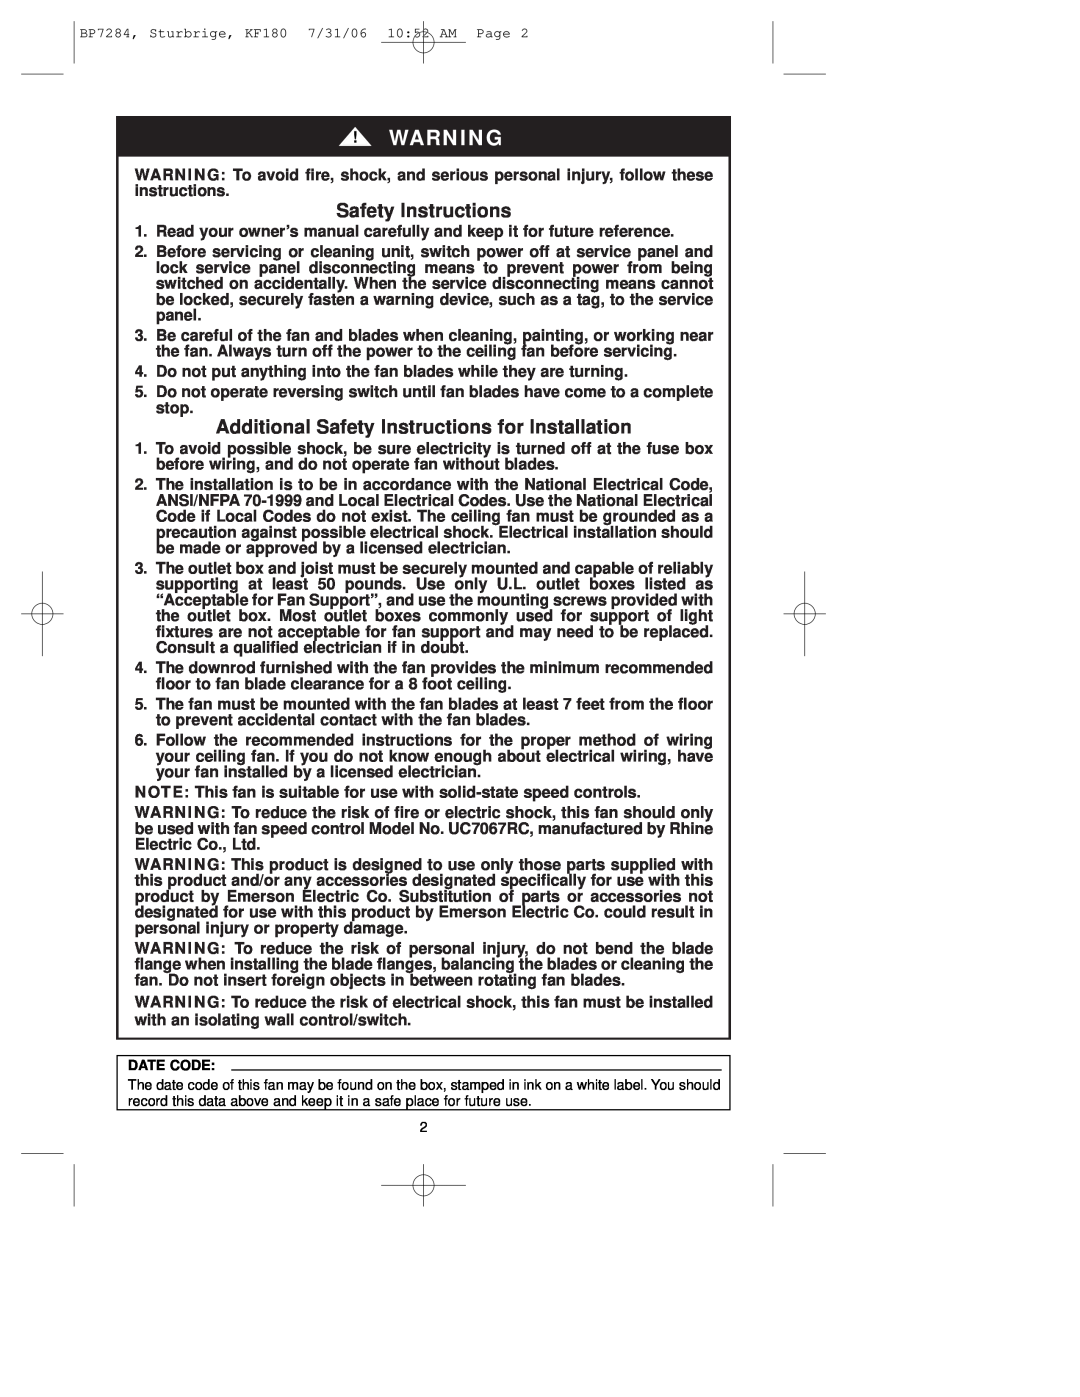 Emerson KF180 owner manual Additional Safety Instructions for Installation, Date Code 